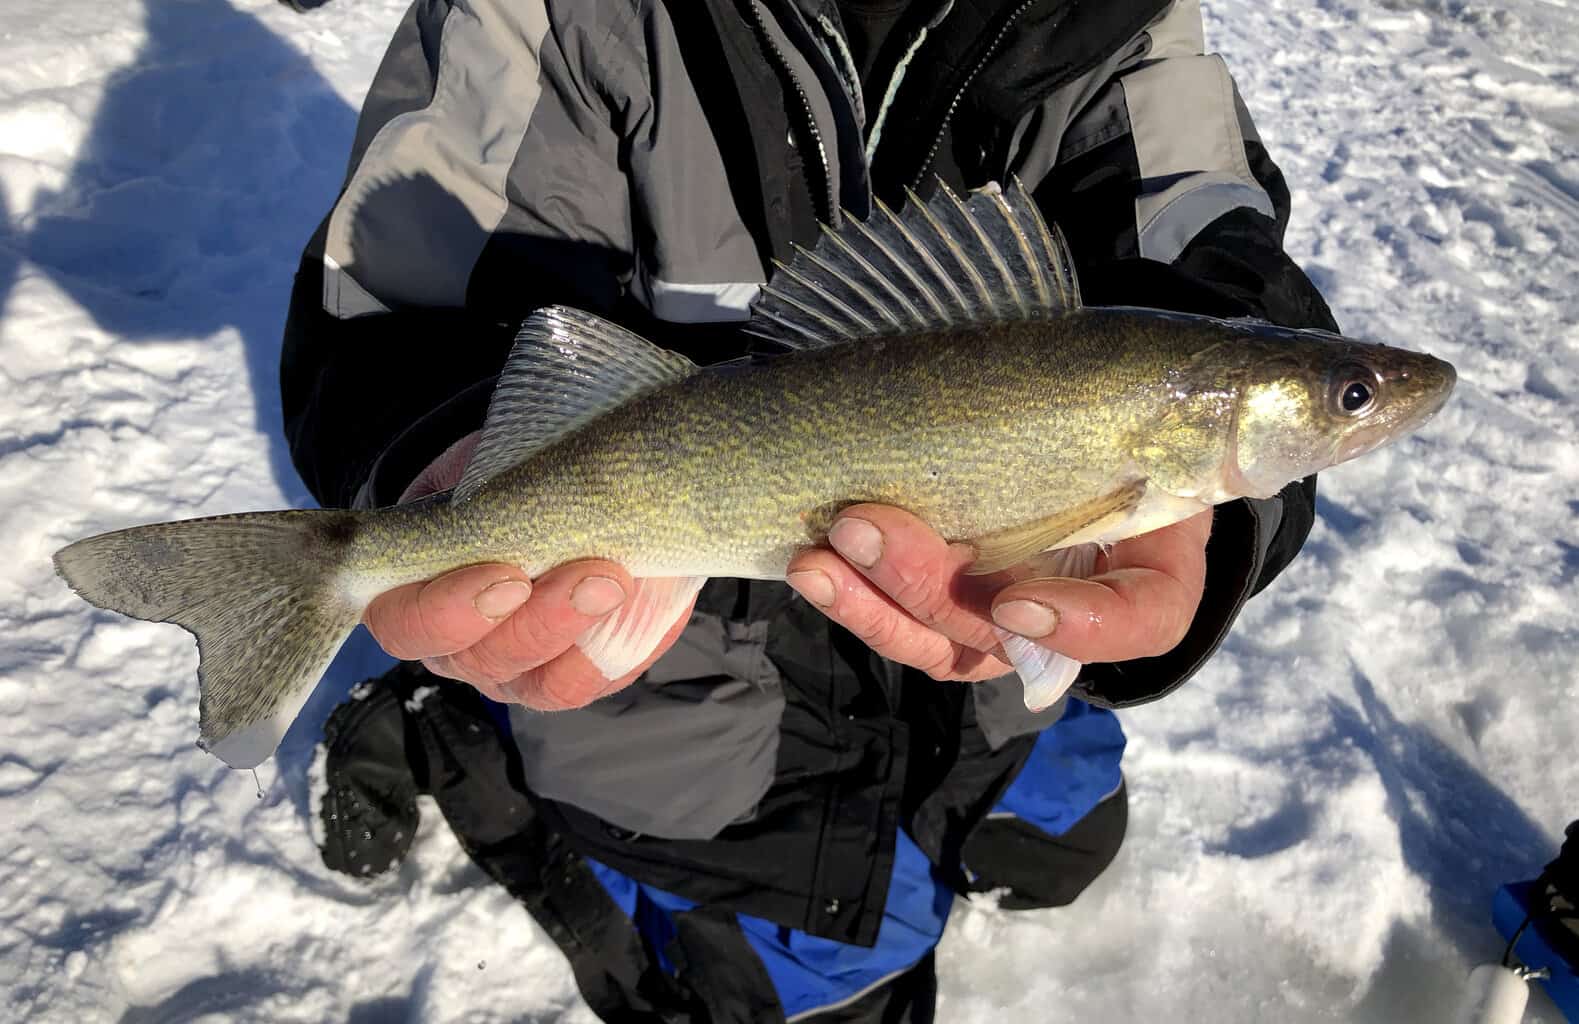 How we icefish from the ice for pike in Sweden (1 out of 15 rods). : r/ IceFishing